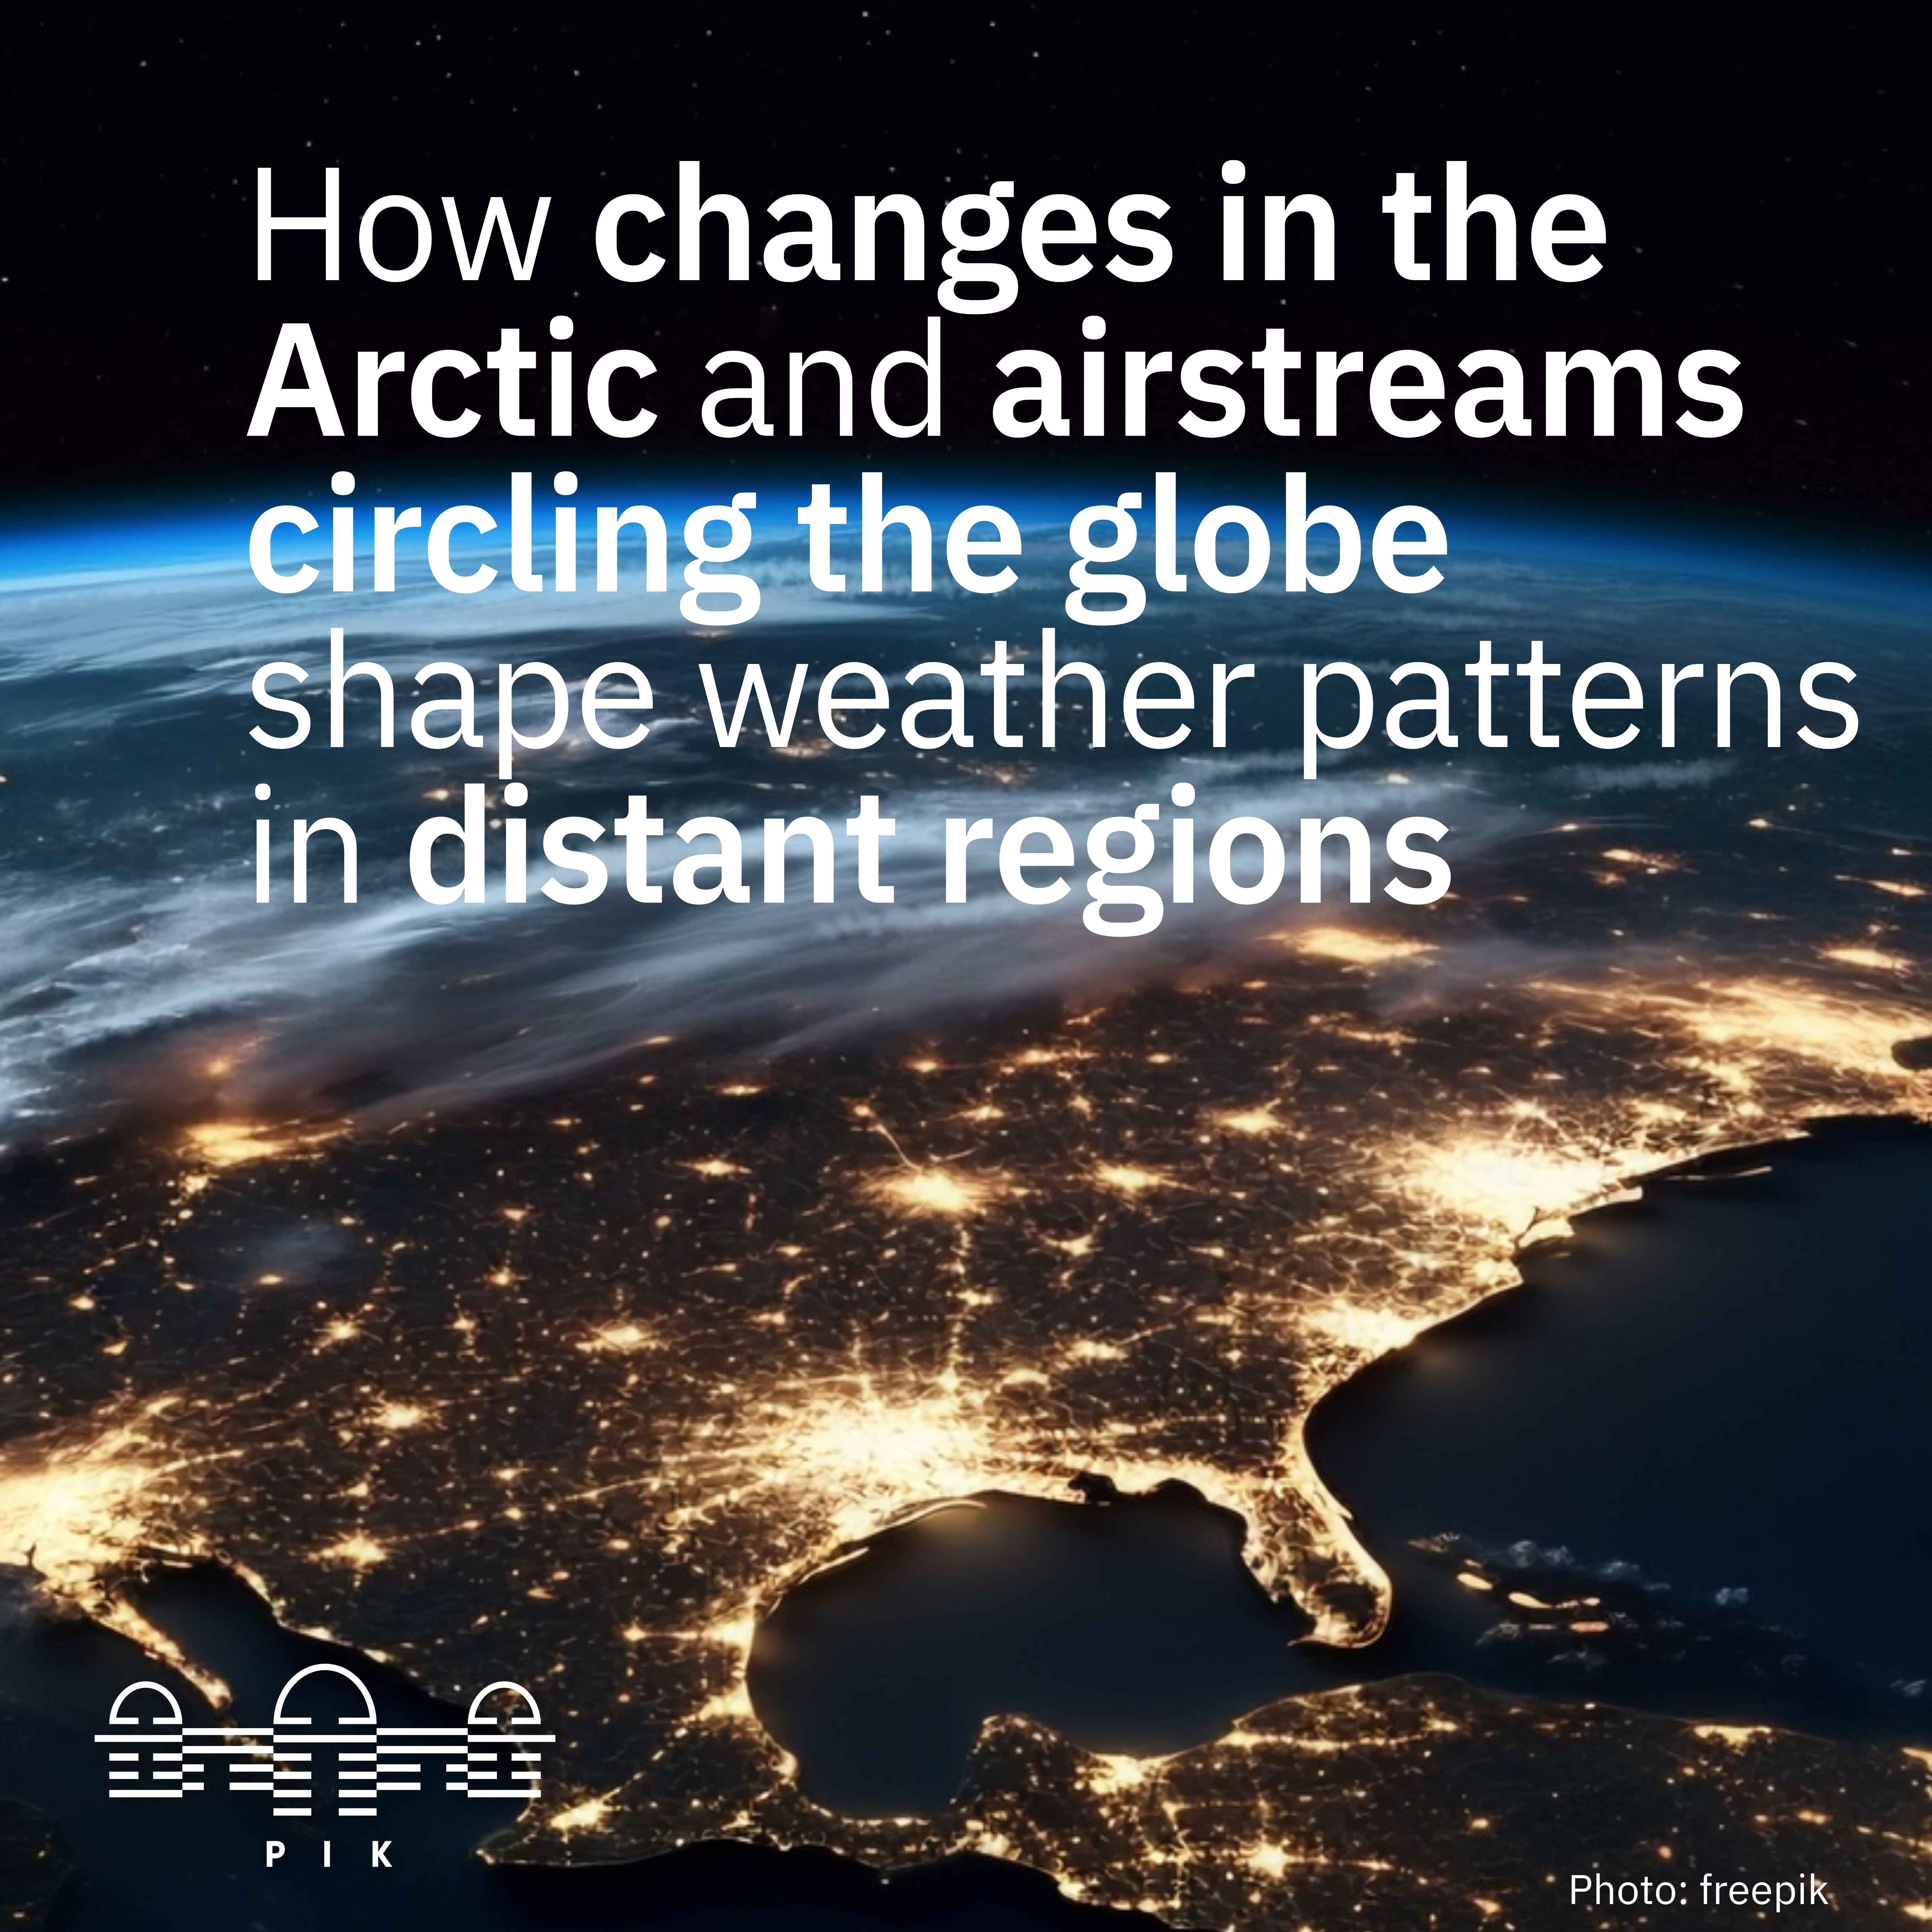 The Arctic shaping global weather patterns